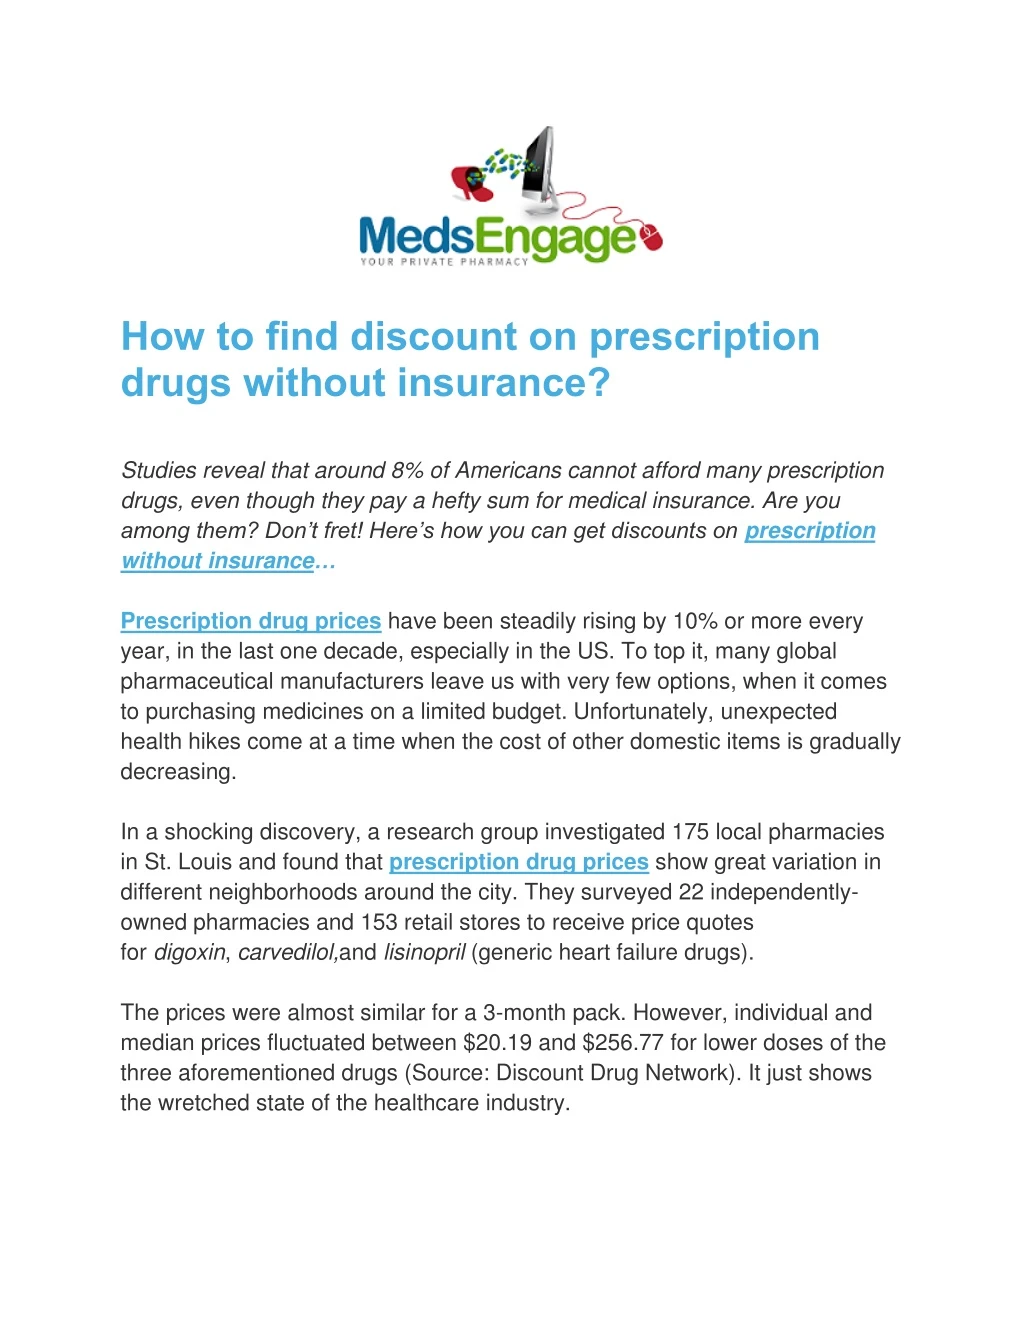 how to find discount on prescription drugs